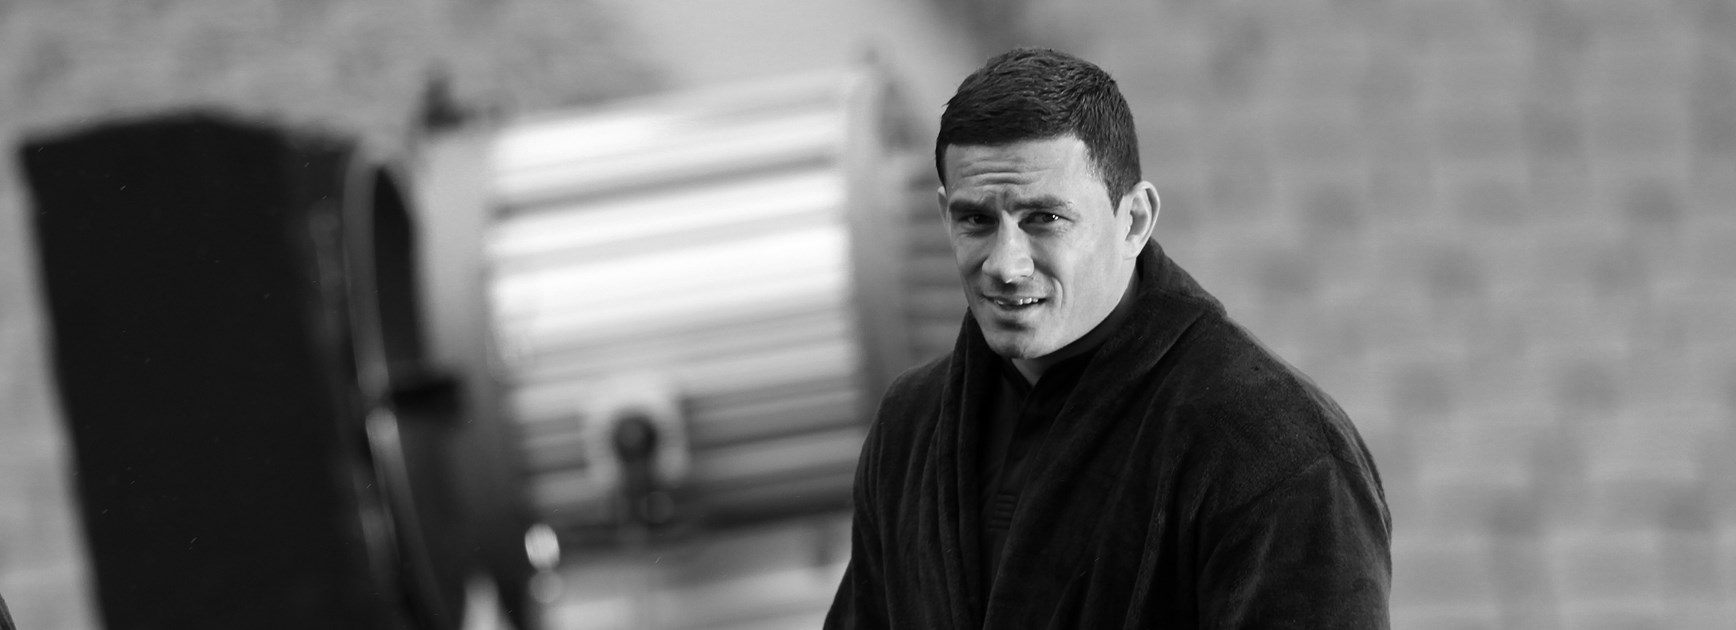 SBW: A timeline of his journey to greatness